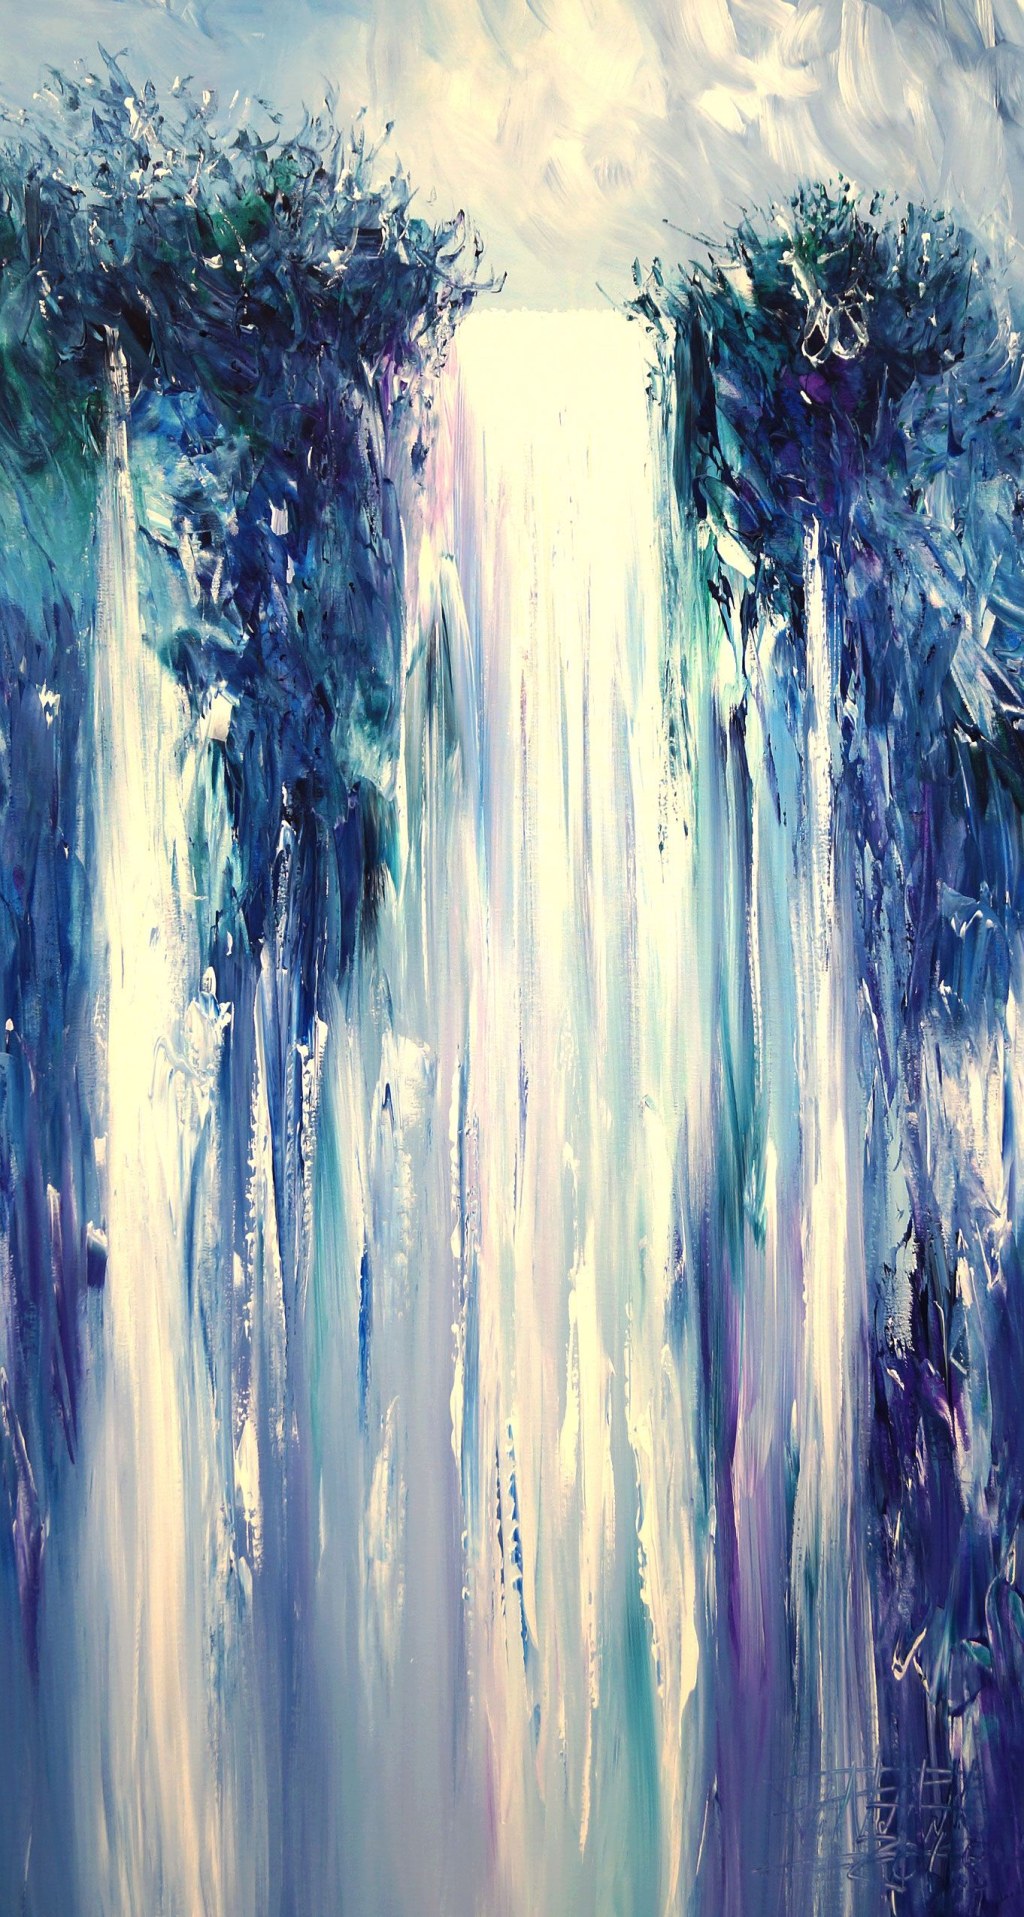 Picture of: Waterfall artwork  Waterfall paintings, Abstract art landscape